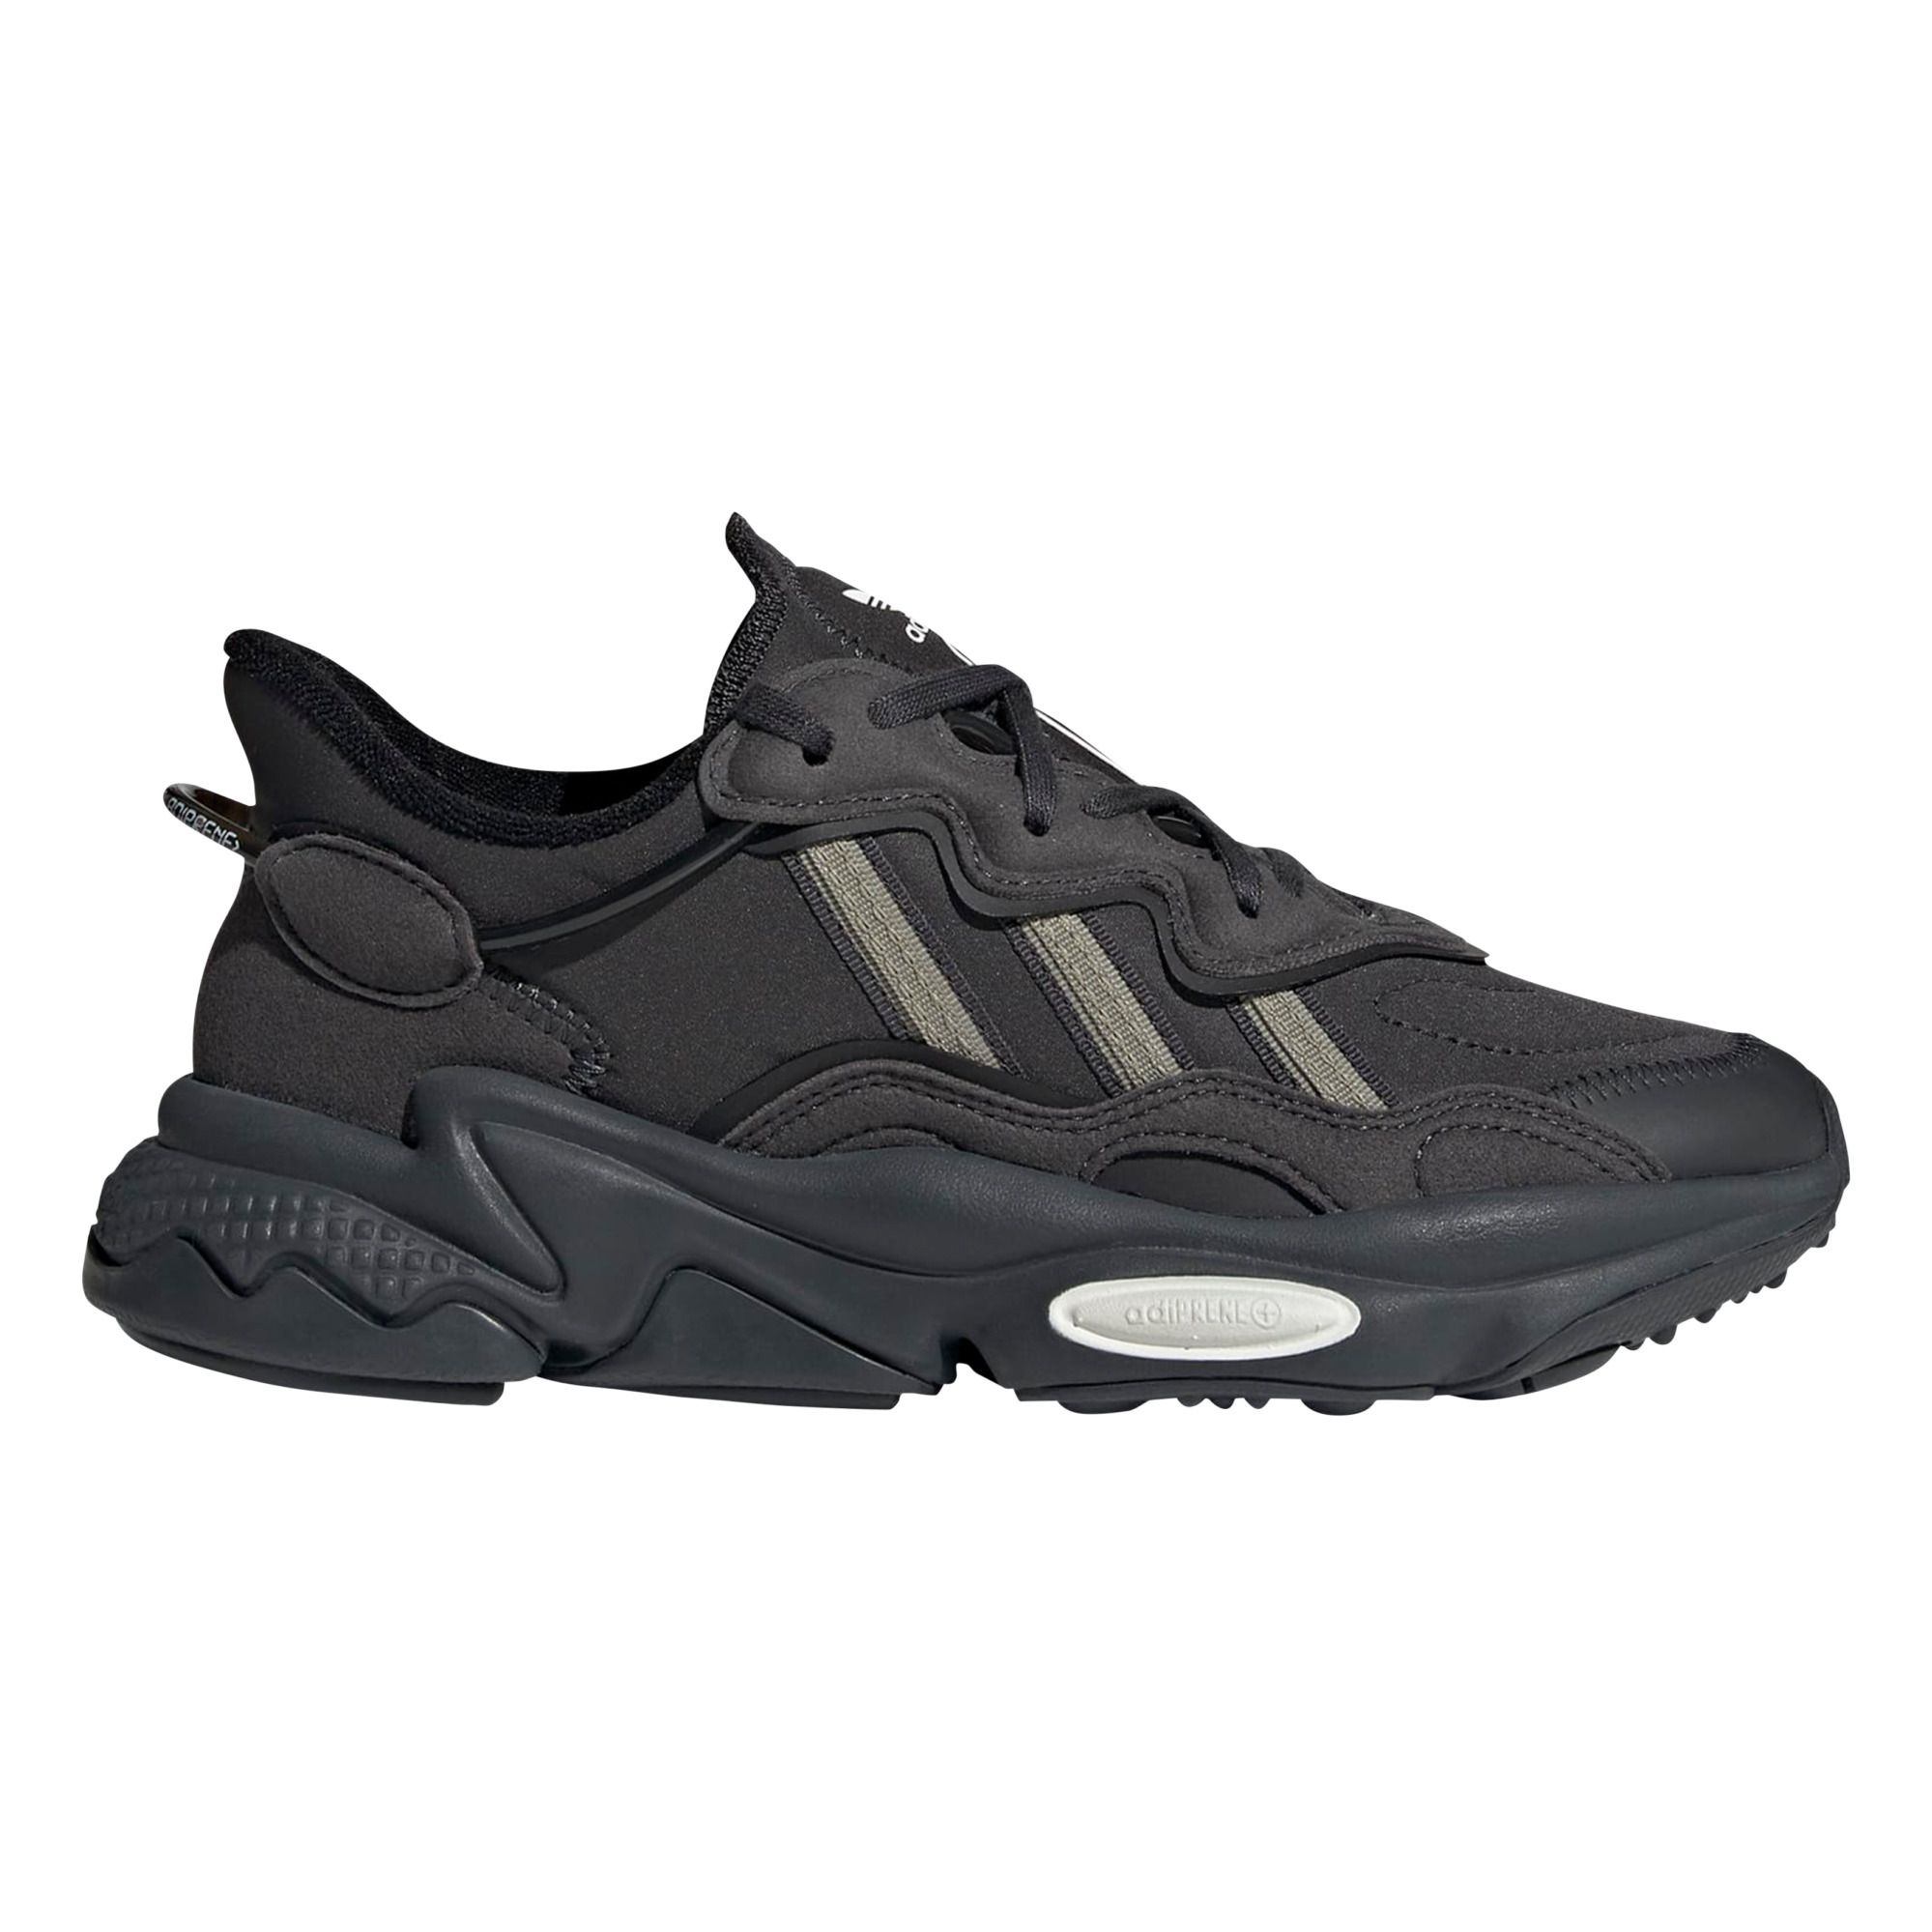 Adidas - Baskets Lacets Ozweego - Fille - Gris anthracite